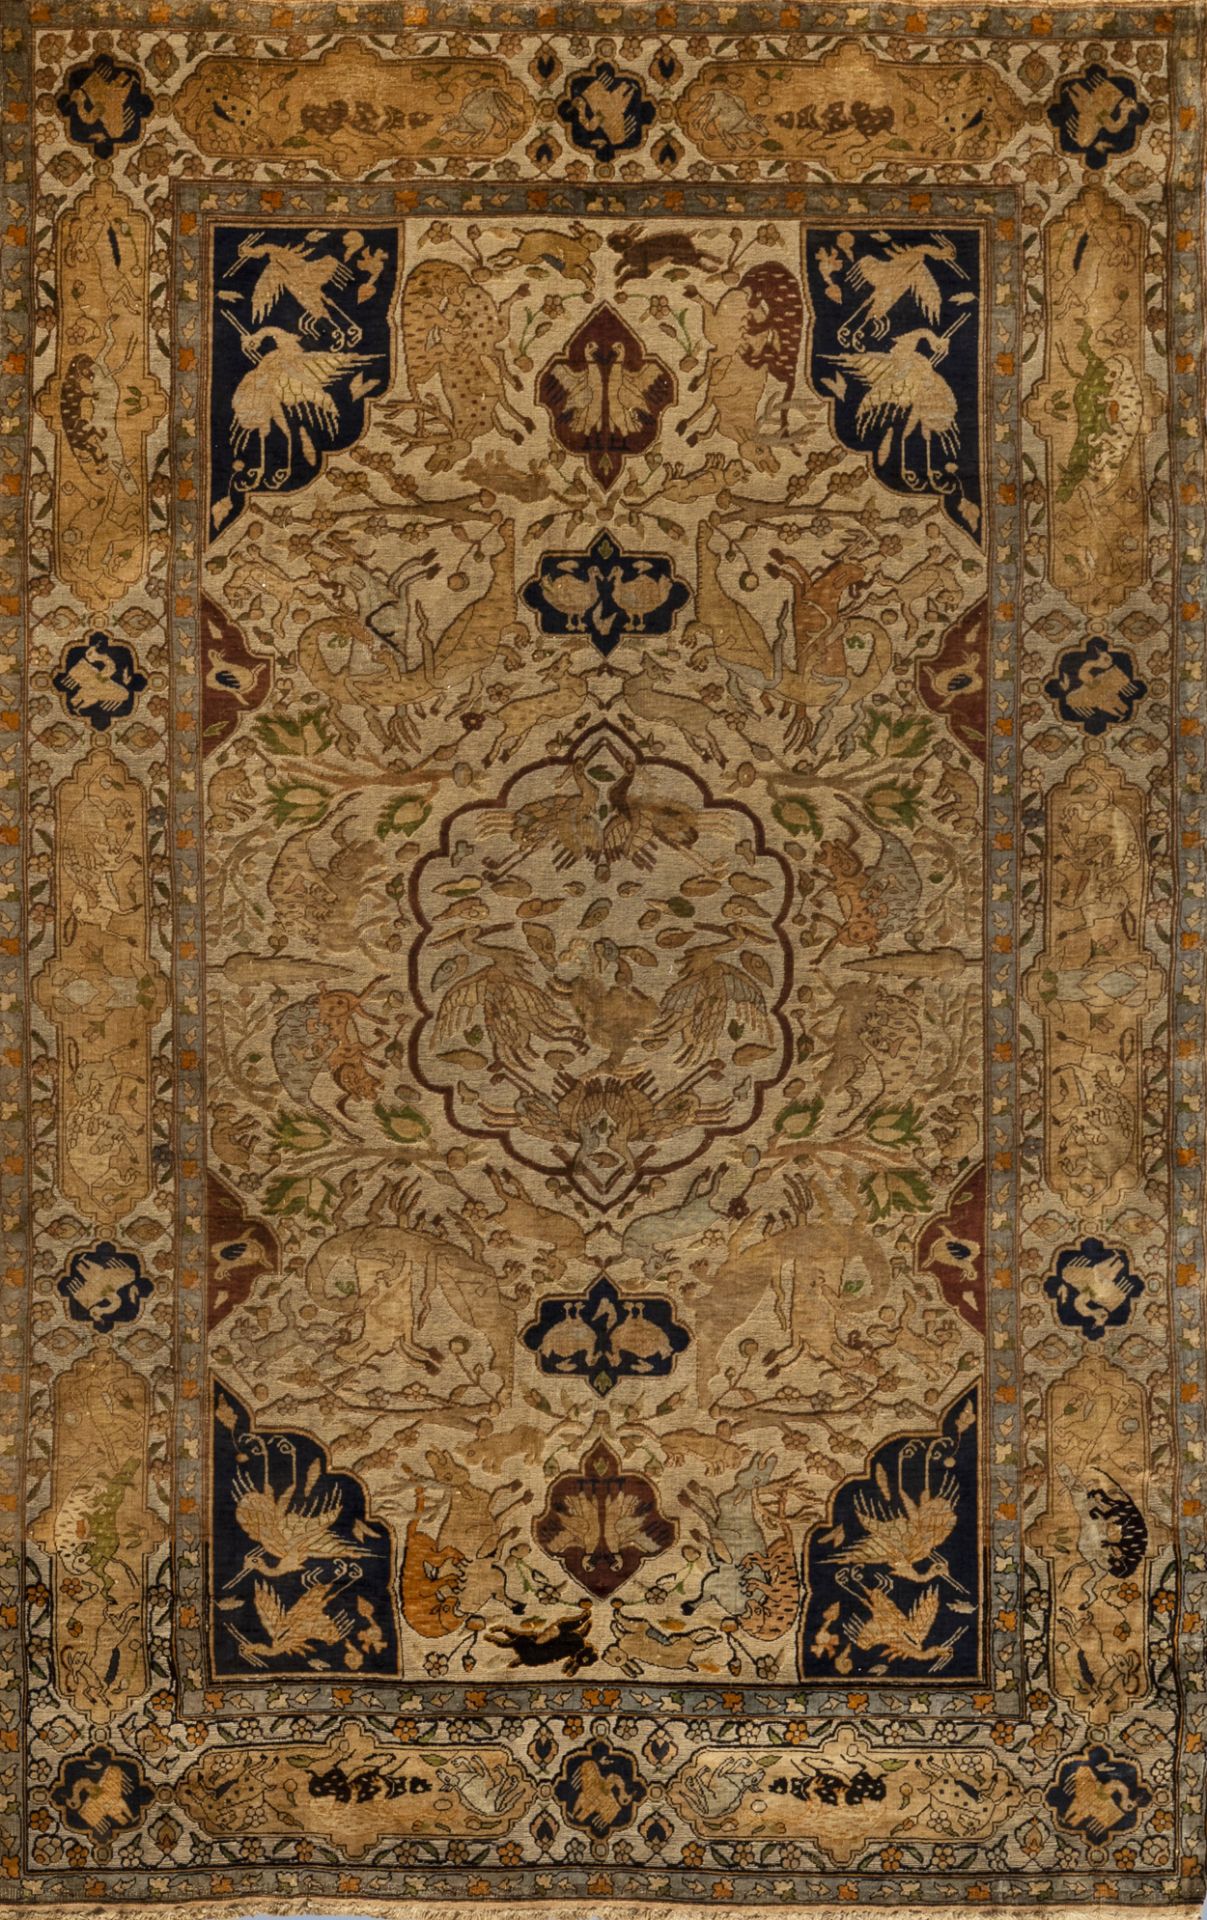 A lavish Oriental rug with animals and floral design, silk and gold thread on cotton, 19th C. - Image 2 of 4